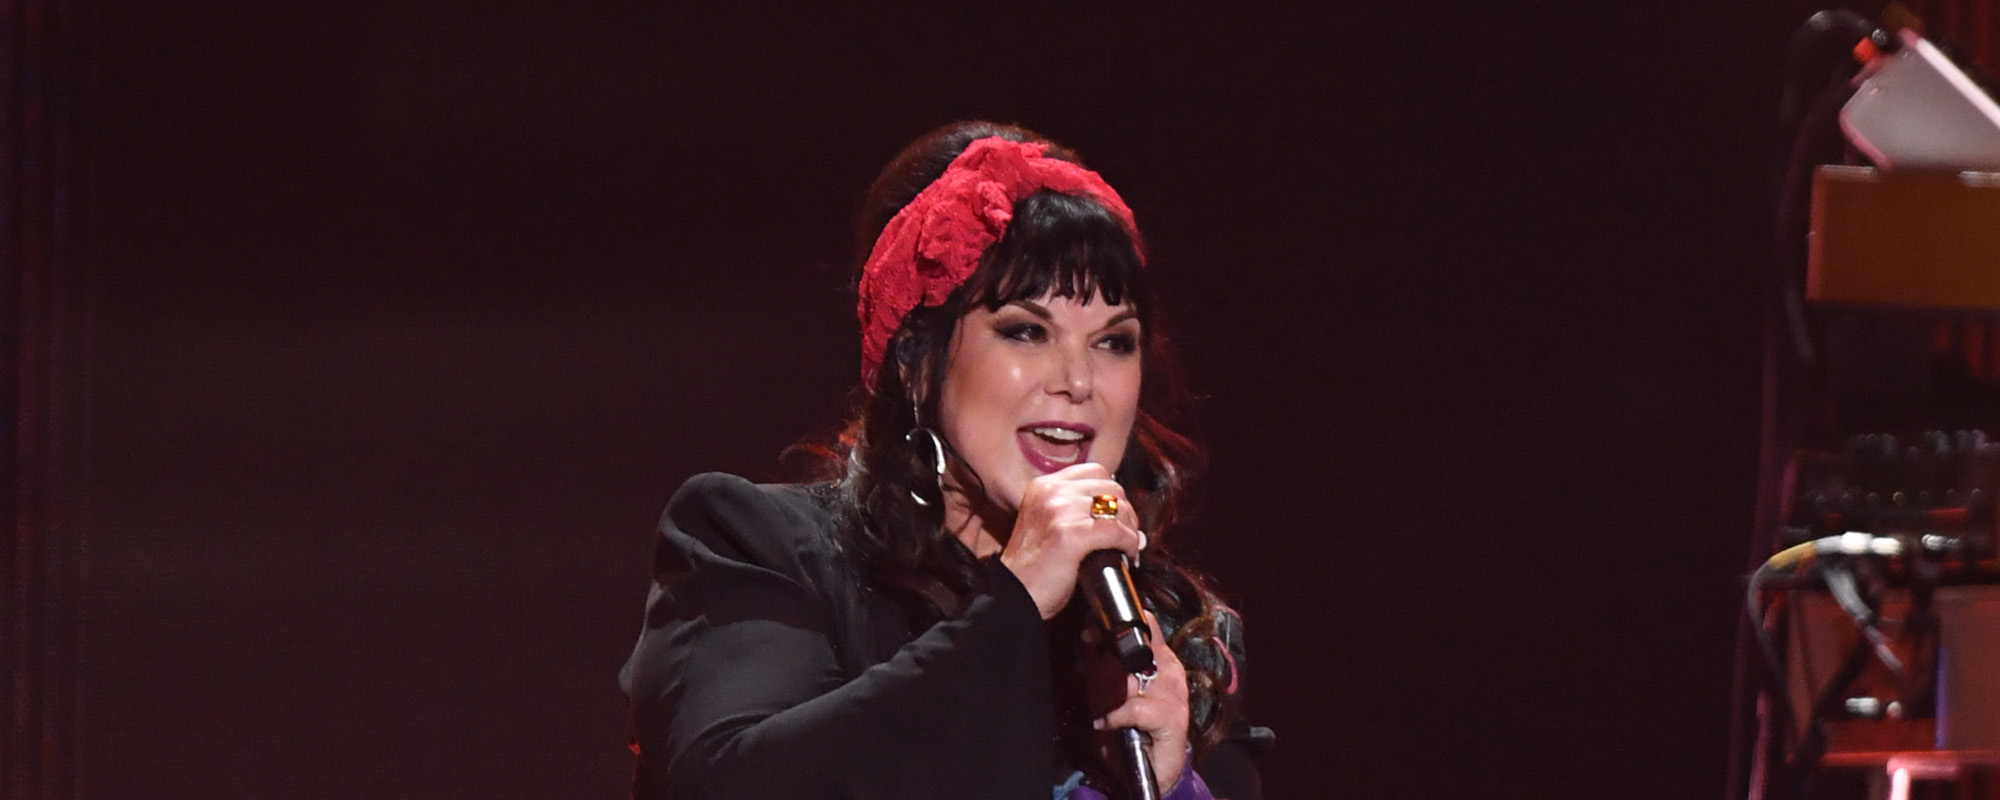 Heart’s Ann Wilson Reveals What it Was Like to Record “Magic Man” with Dolly Parton for ‘Rockstar’